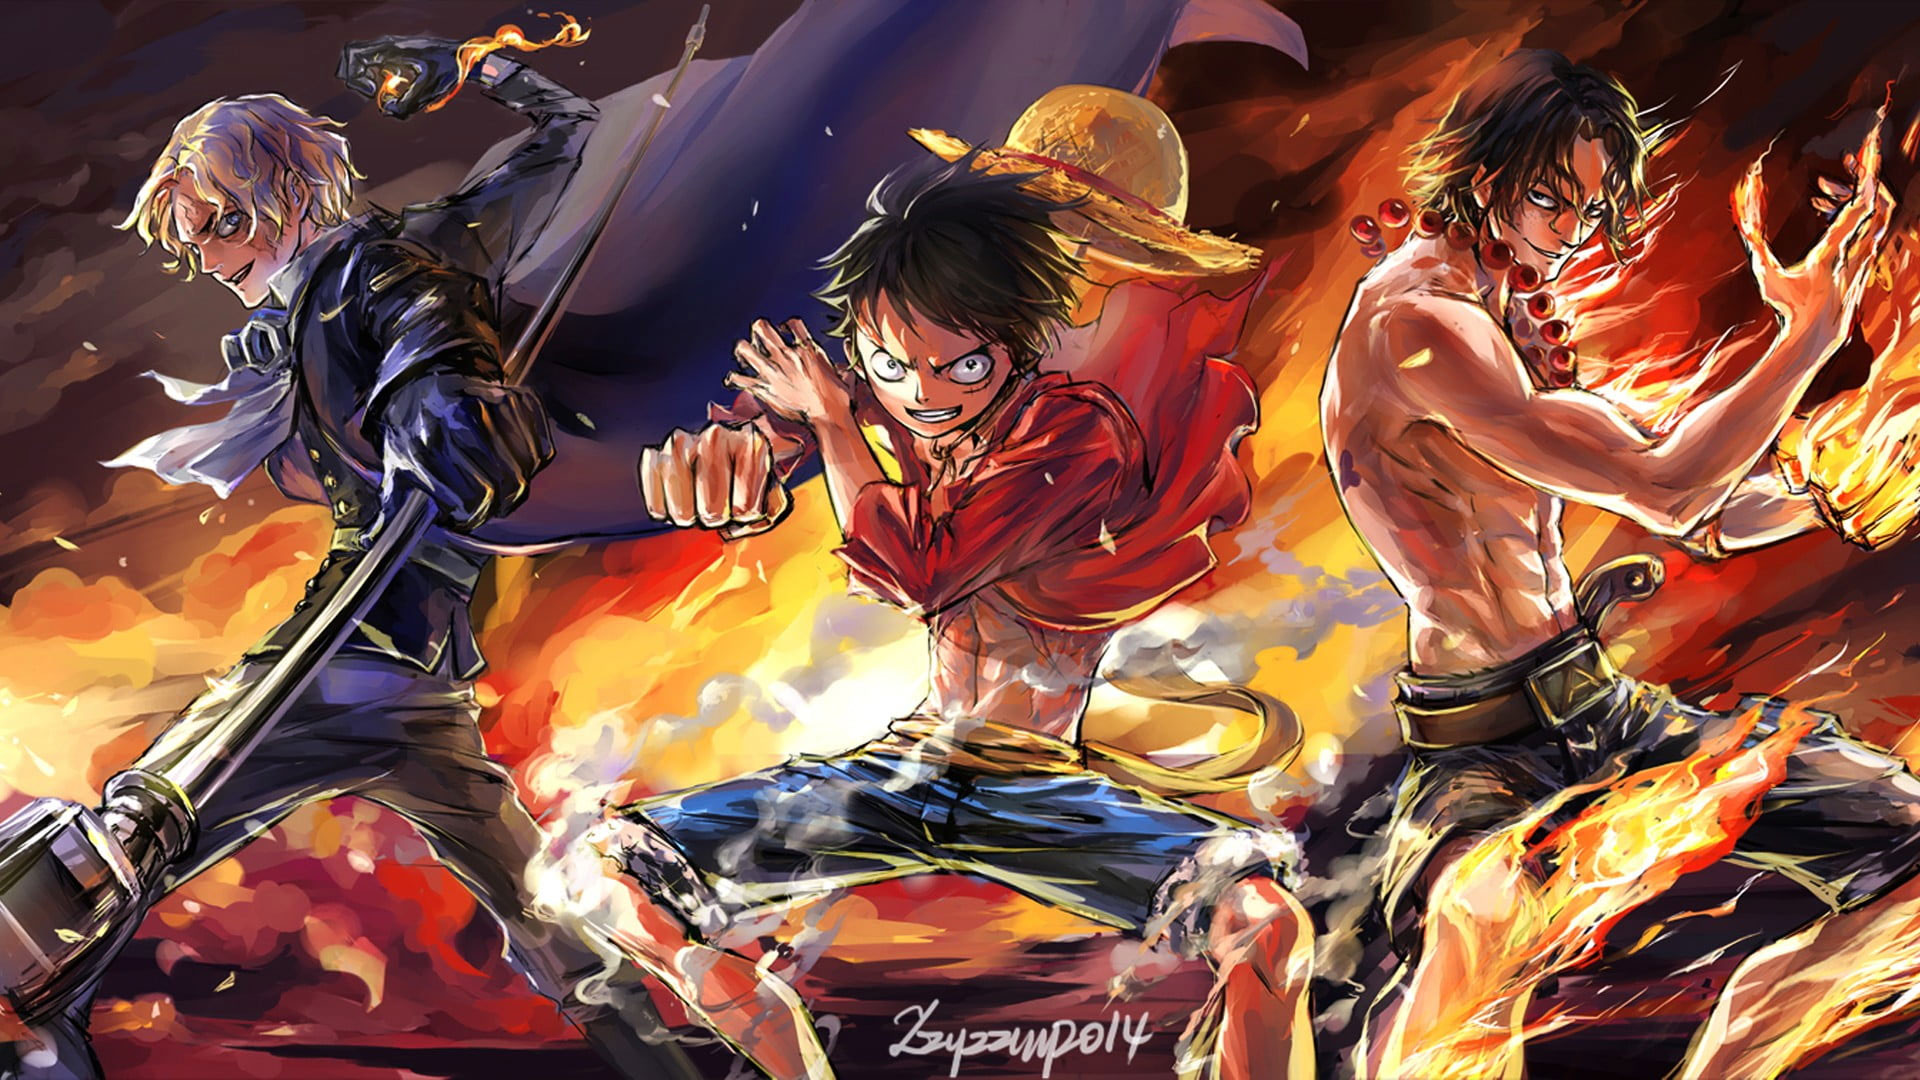 One Piece wallpaper, Monkey D. Luffy, Portgas D. Ace, Sabo, group of people